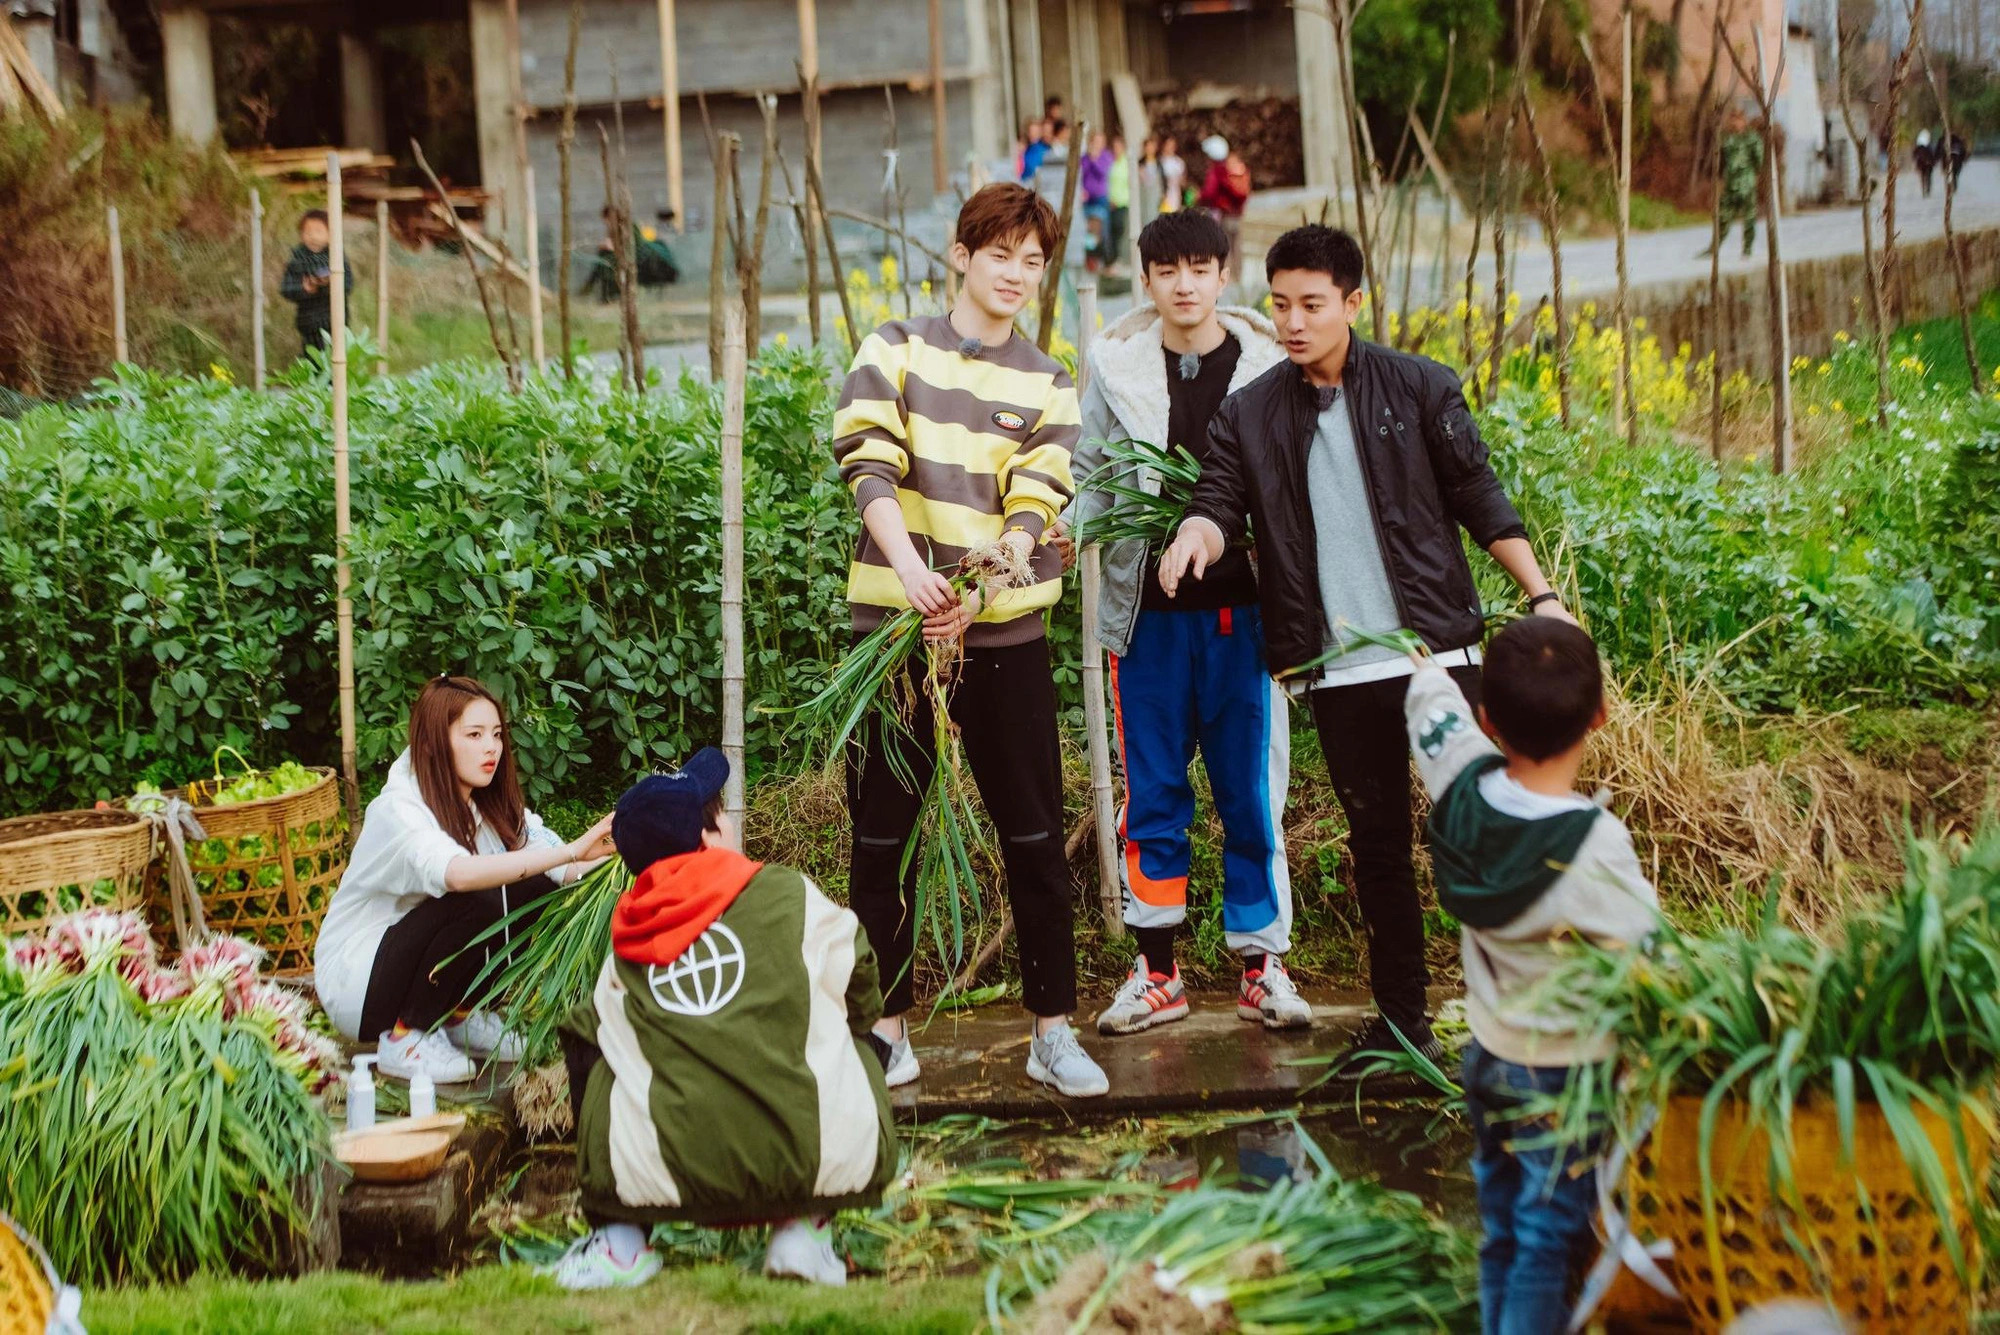 Cast members who are famous artists experience rural life in China’s ‘Haha Farmer’ reality TV show. Photo: Supplied